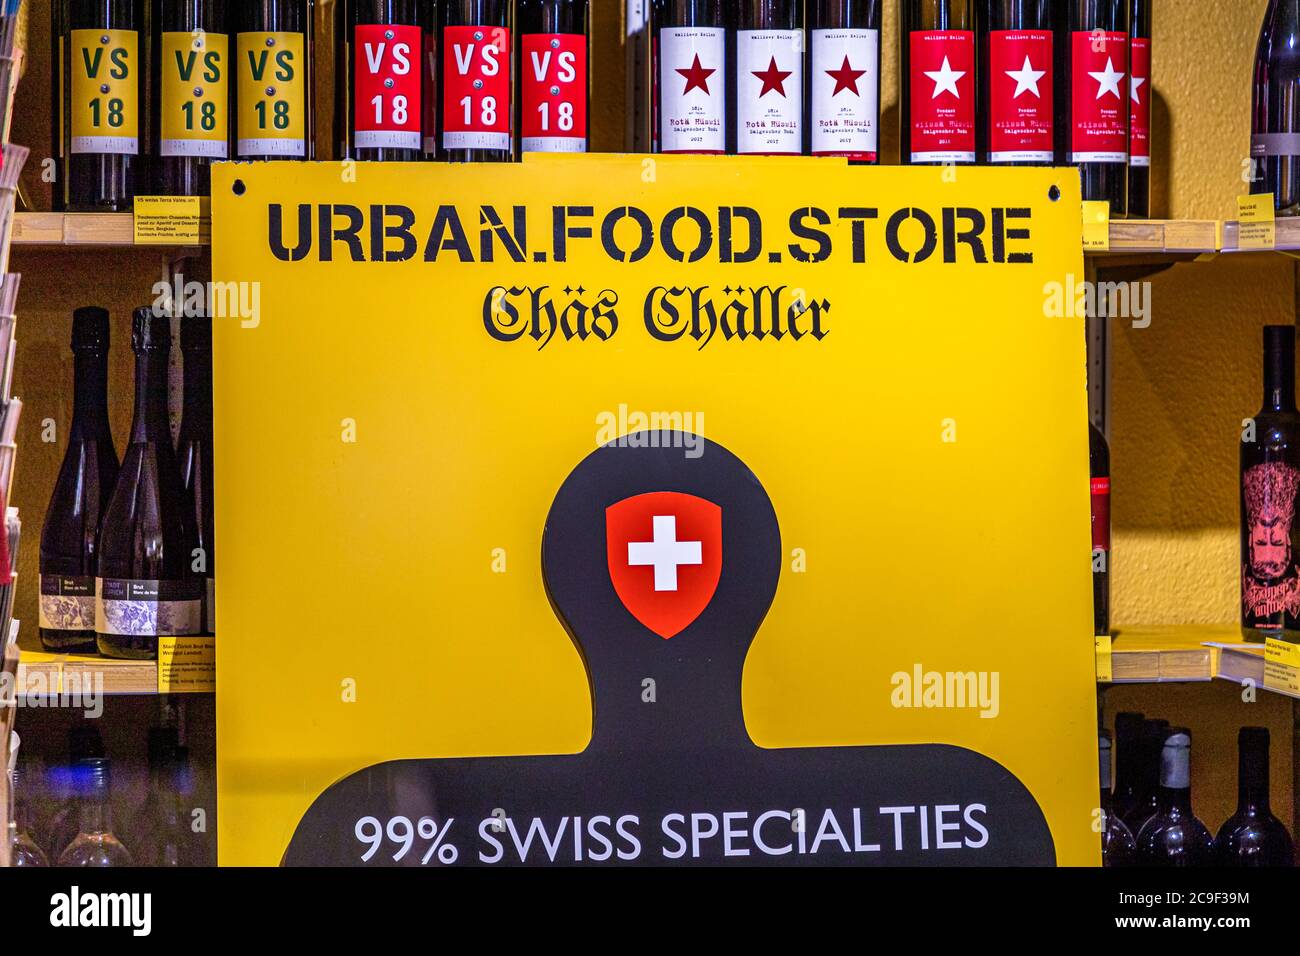 Urban Food Store Chäs Chäller. Zurich Food Tour, Switzerland. The tour of Zurich is all about Swiss and, whenever possible, Zurich specialties. Many products are entwined with beautiful stories Stock Photo